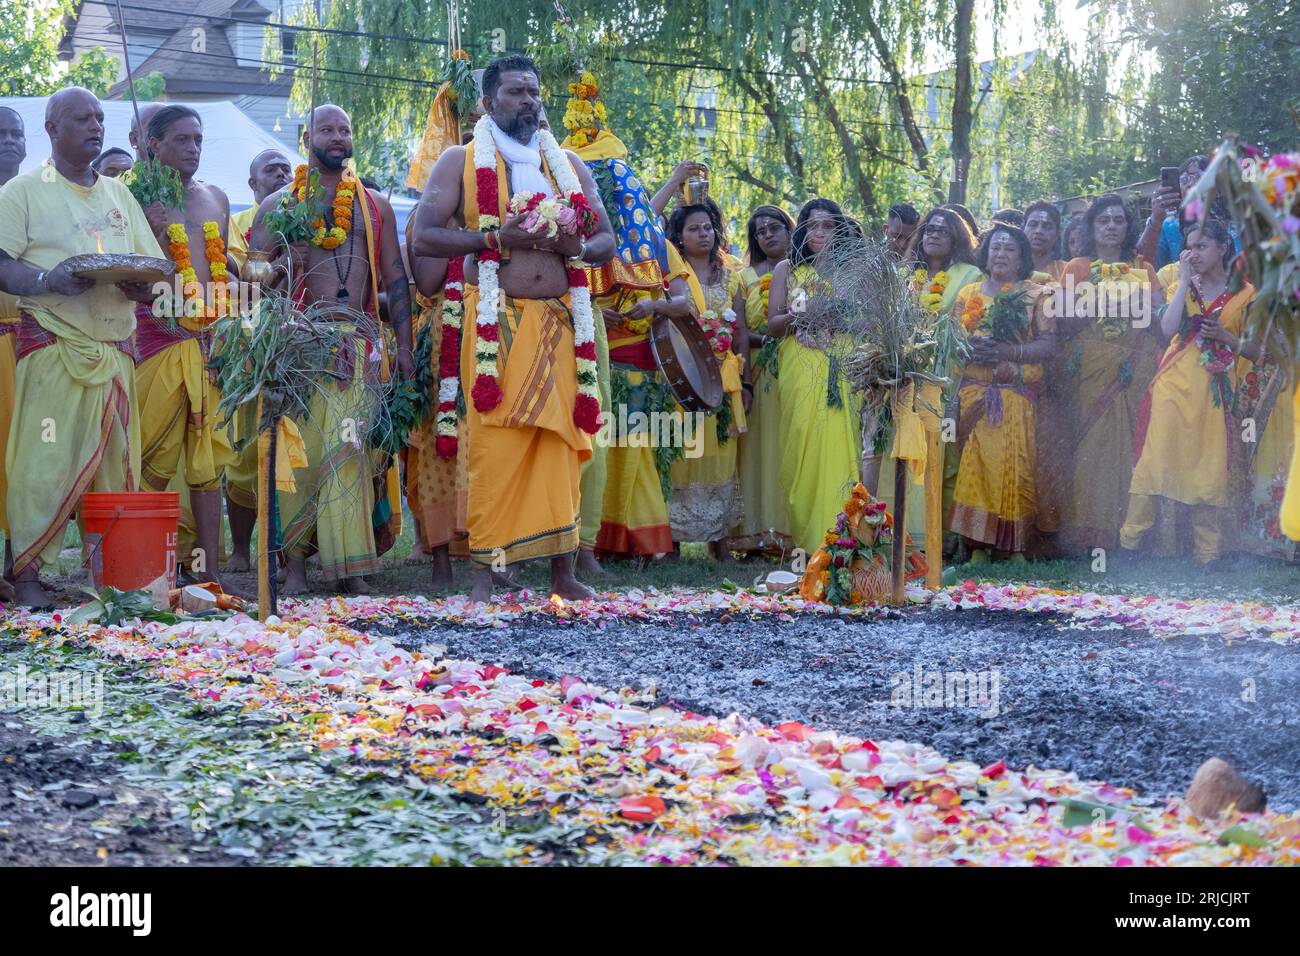 Pandit Ayya Goparla Maroude at the start of the walk through hot burning coals, Thimithi Fire Walking Festival in Jamaica, Queens New York Stock Photo